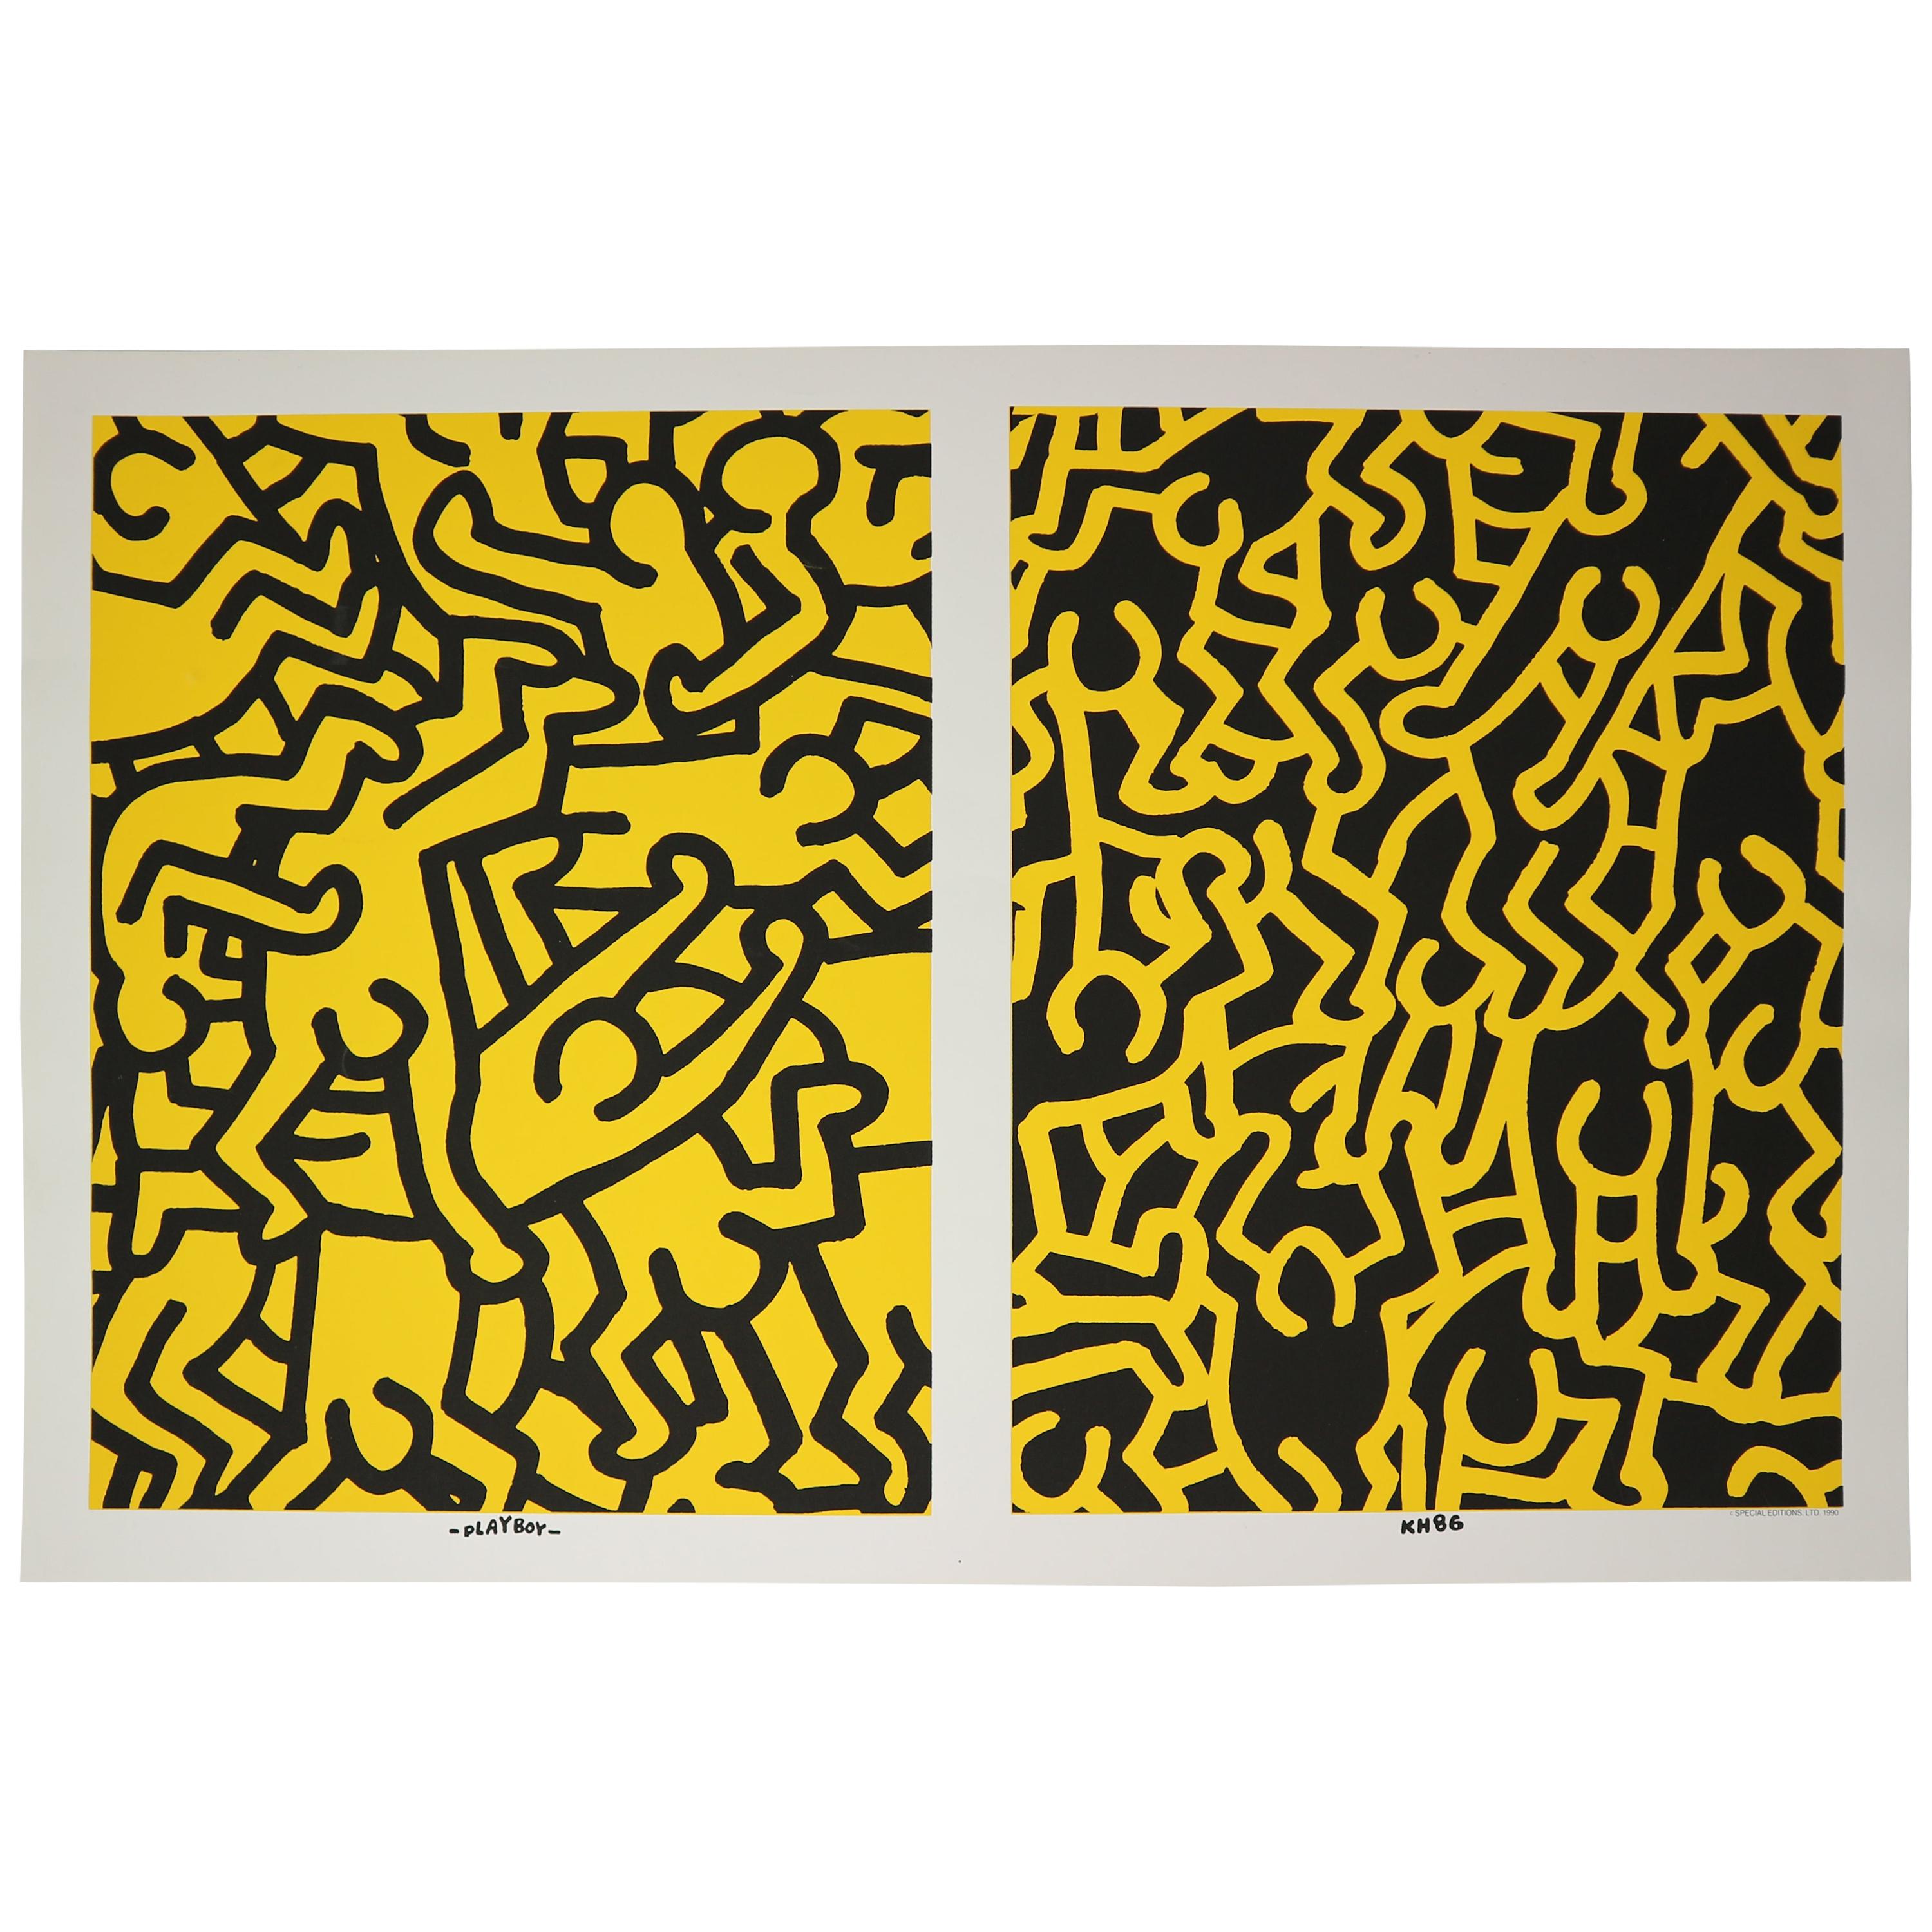 Special Edition silkscreen by Keith Haring "Playboy KH86, " 1990